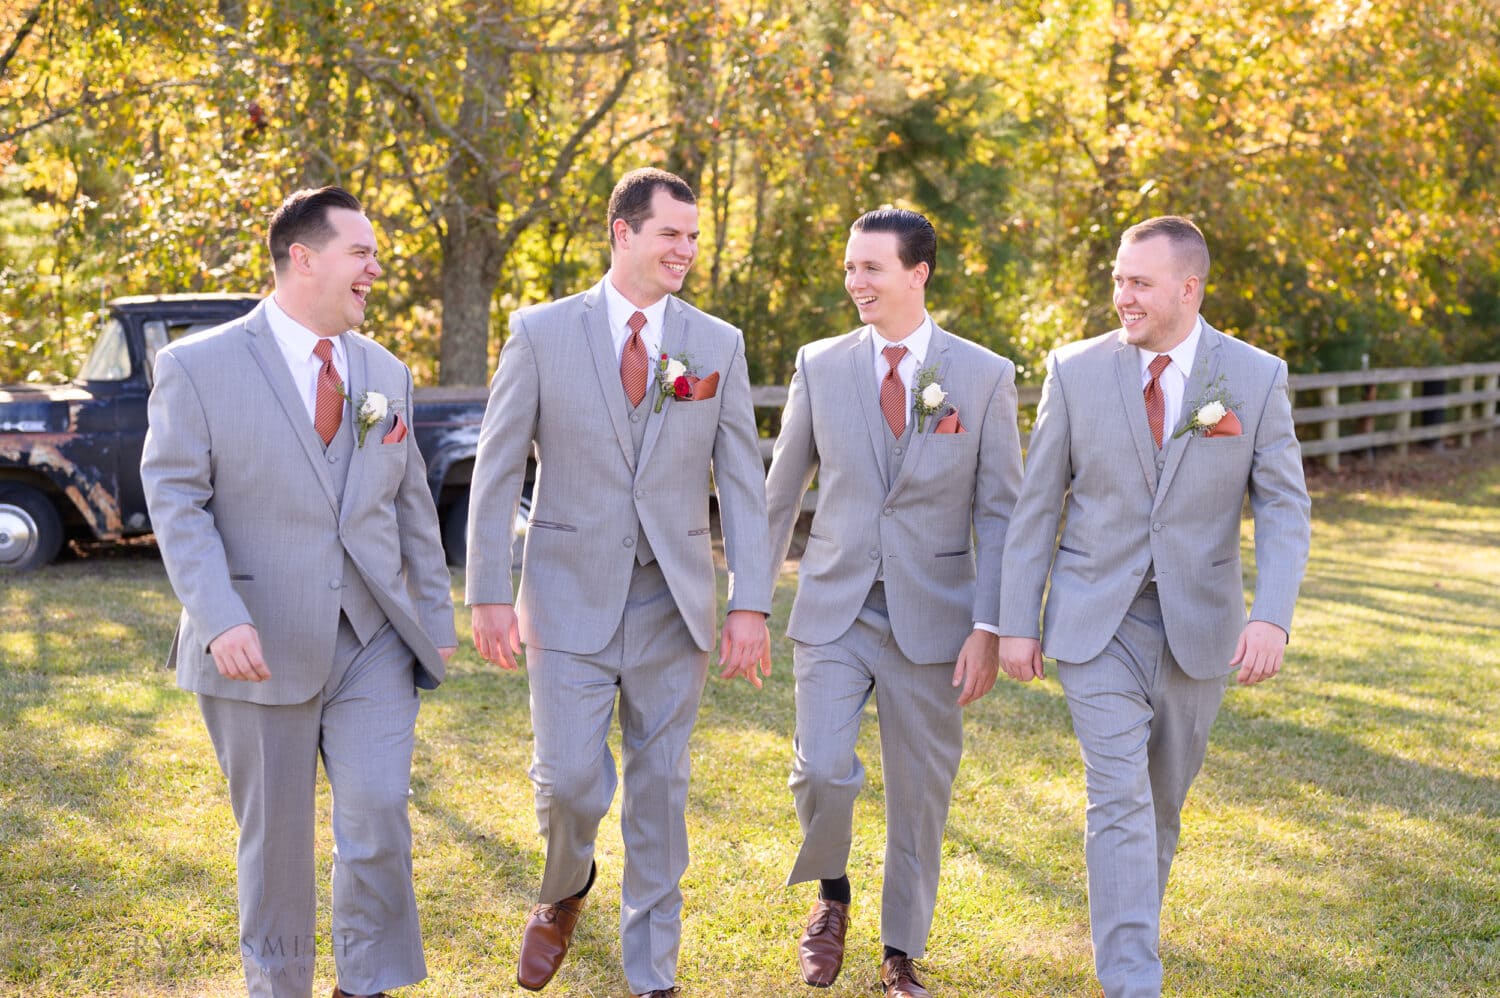 Groomsmen walking together - The Blessed Barn